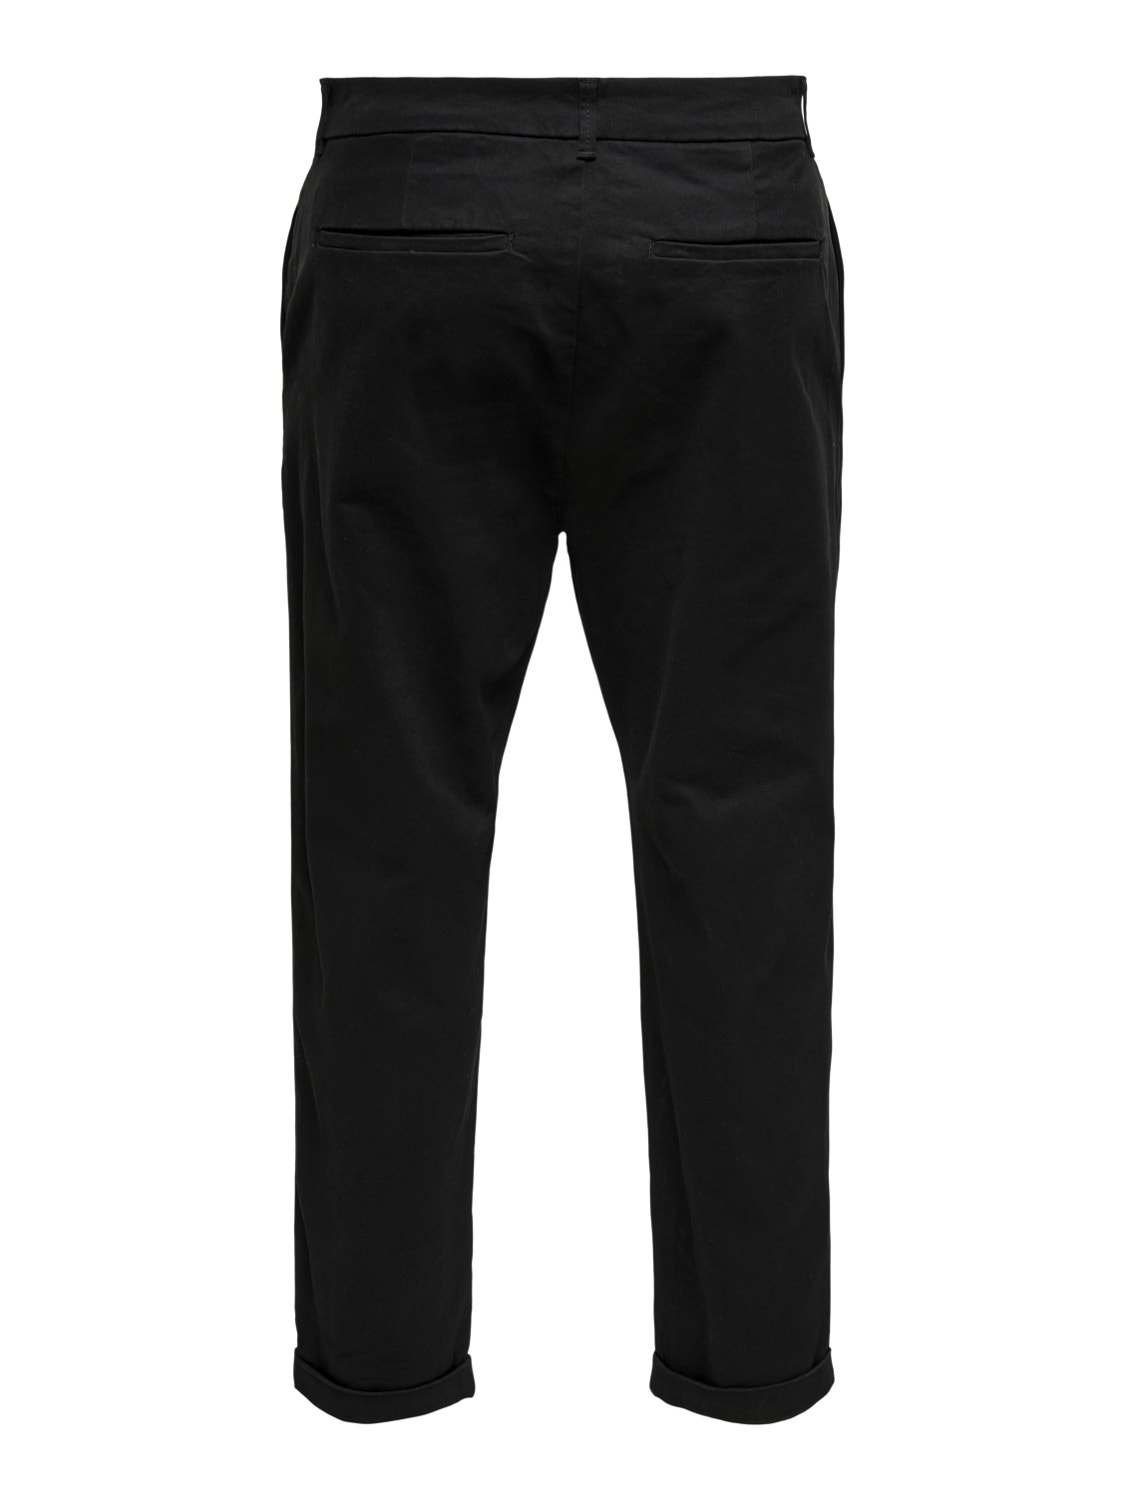 ONLY & SONS Normal geschnitten Chino Hose -Black - 22020400